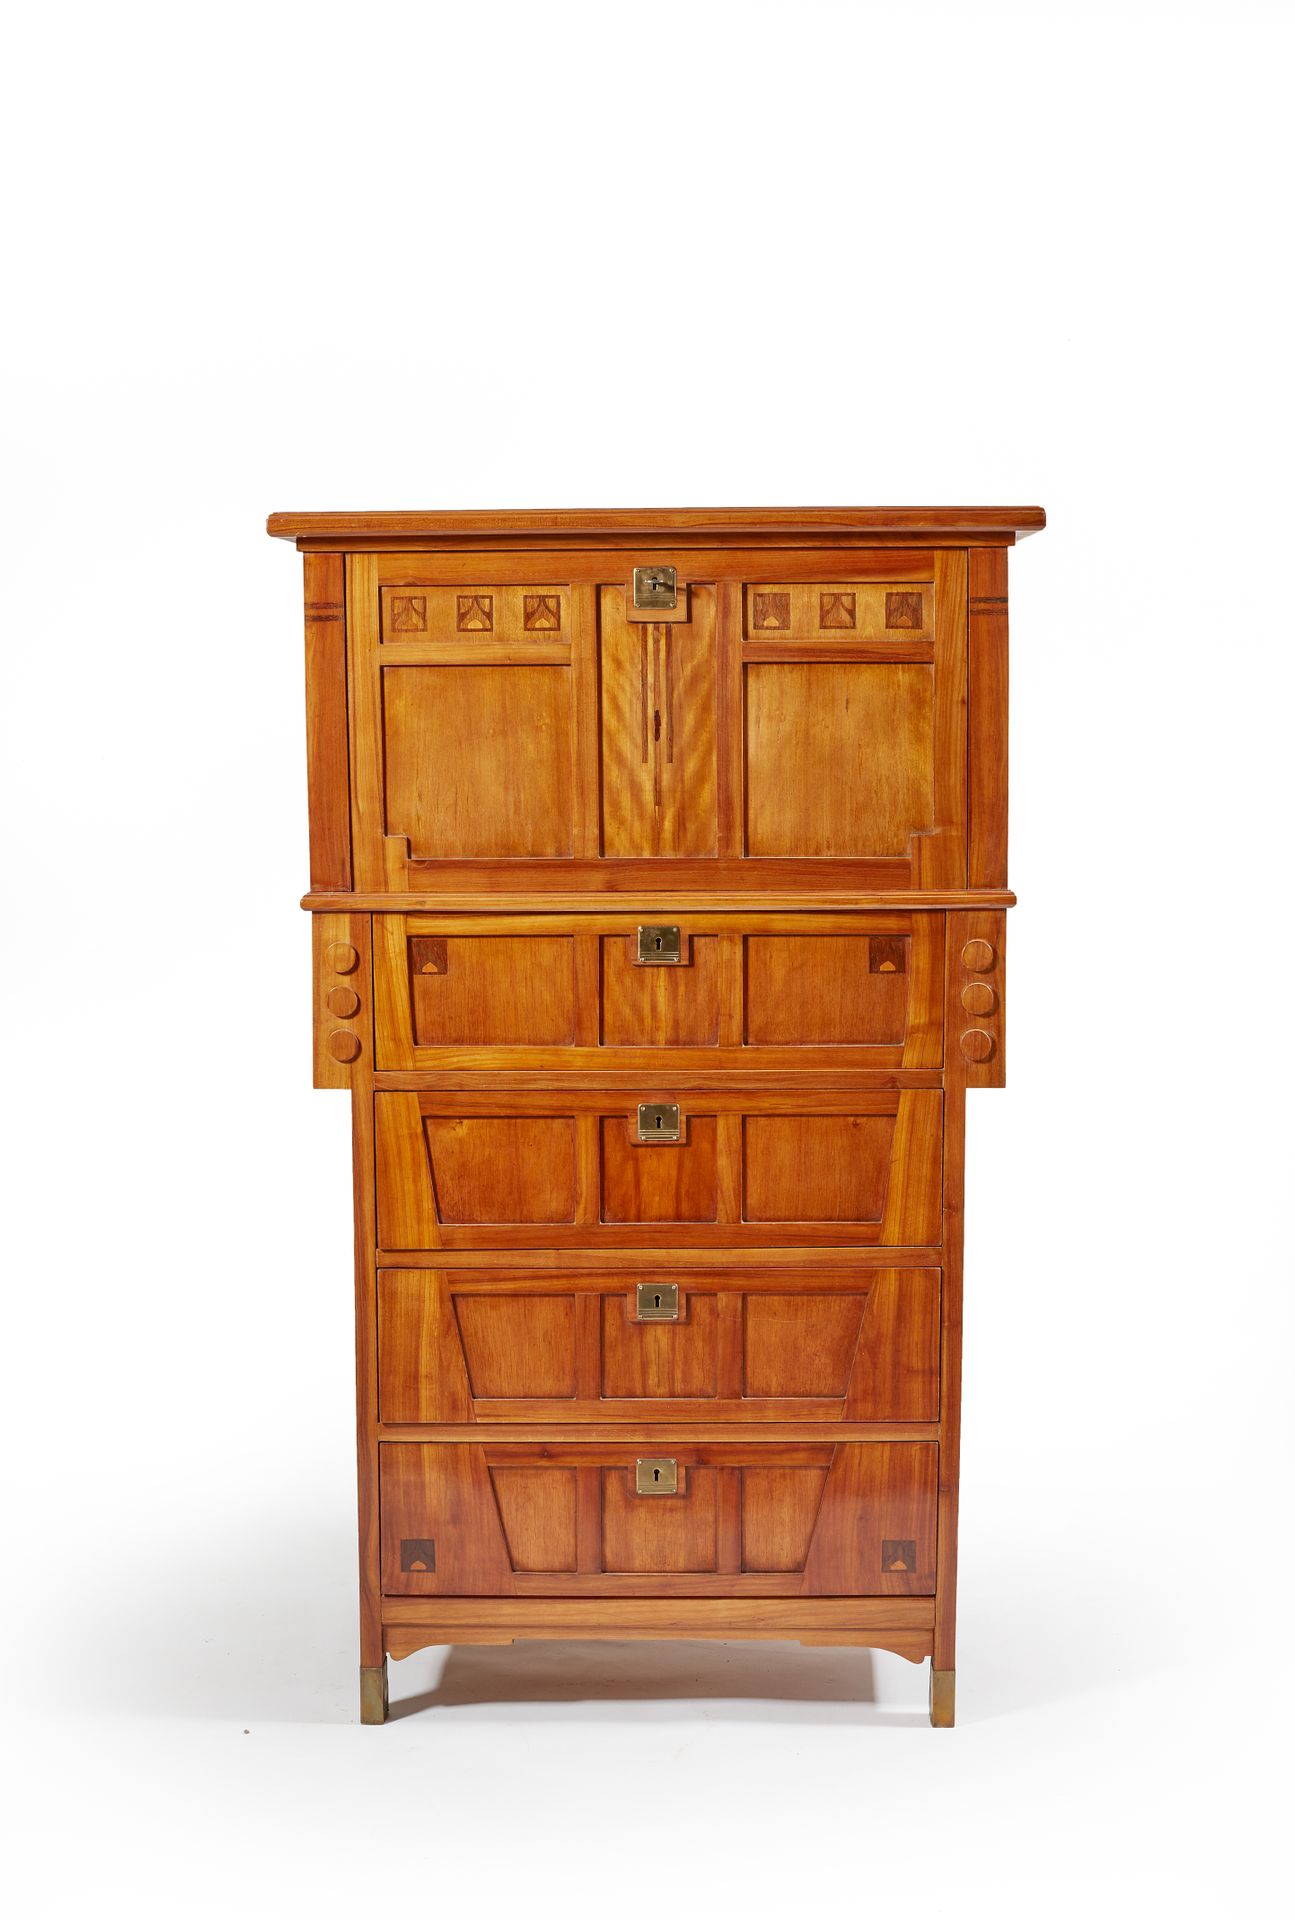 Null Secretary in cherry wood with marquetry decoration opening in front of four&hellip;